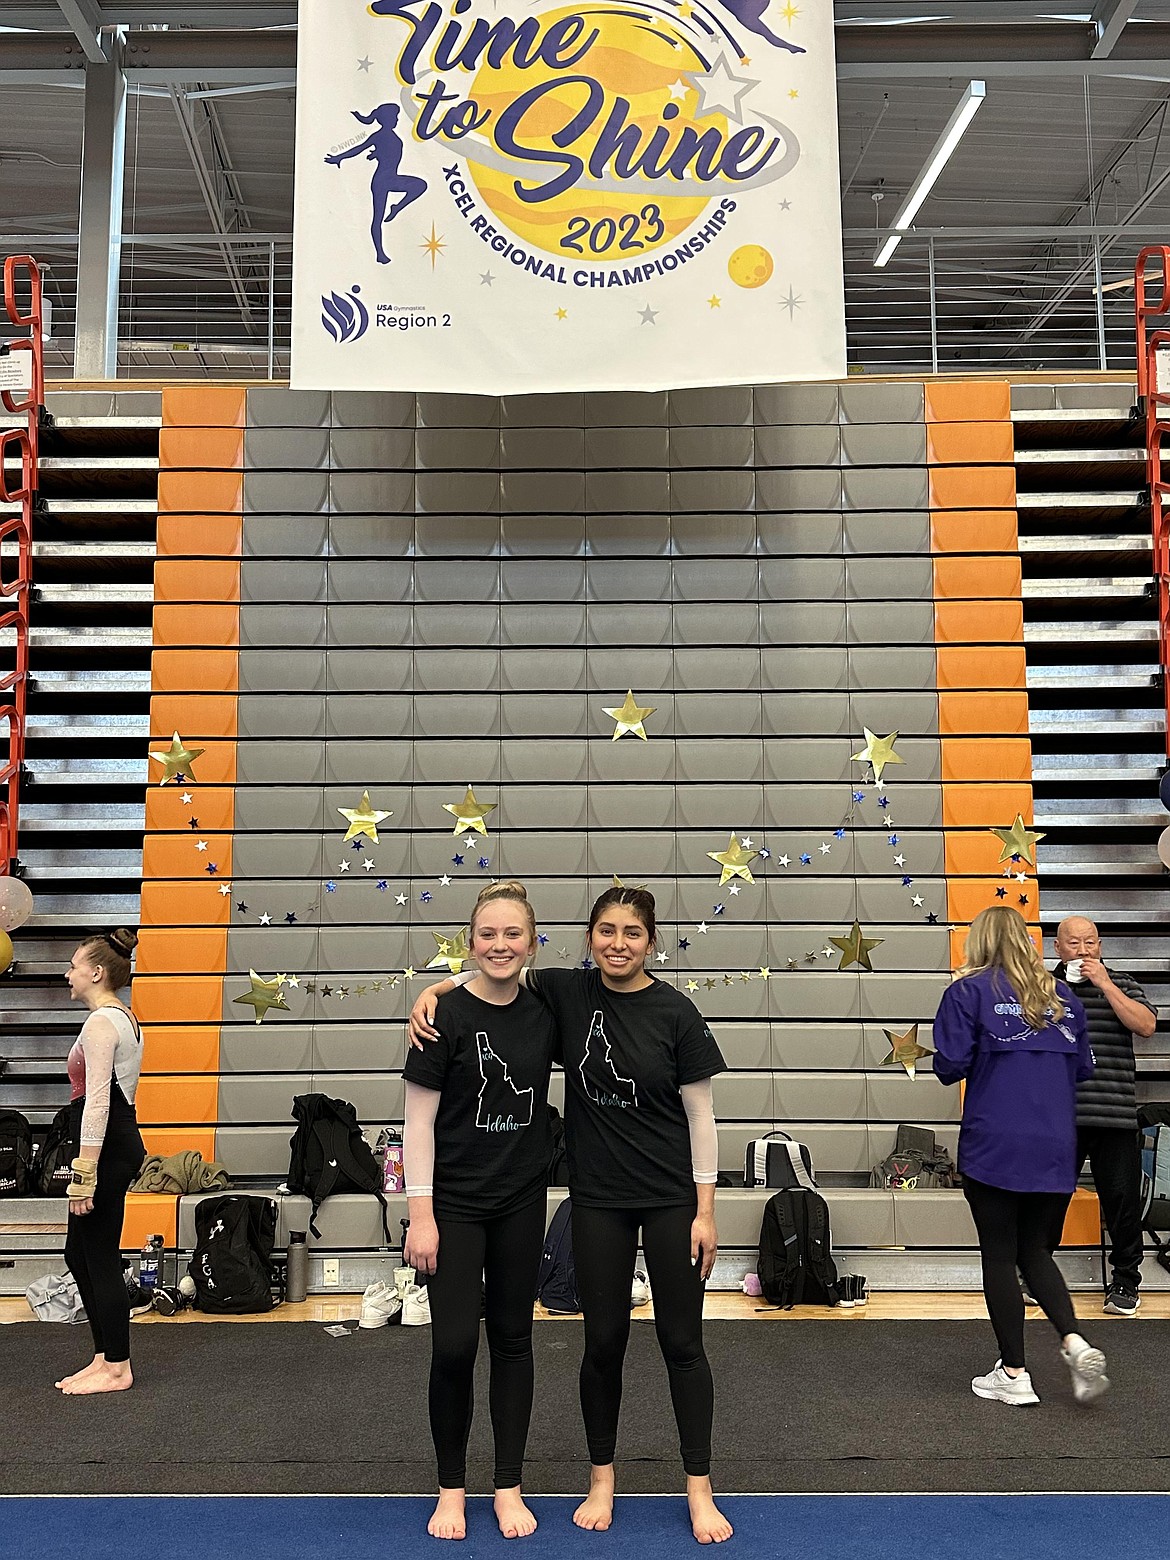 Courtesy photo
Avant Coeur Senior Xcel Golds competed in Everett, Wash., at the Region 2 Xcel Regional Championships. From left are Allie Scott and Carisa Gencarella.